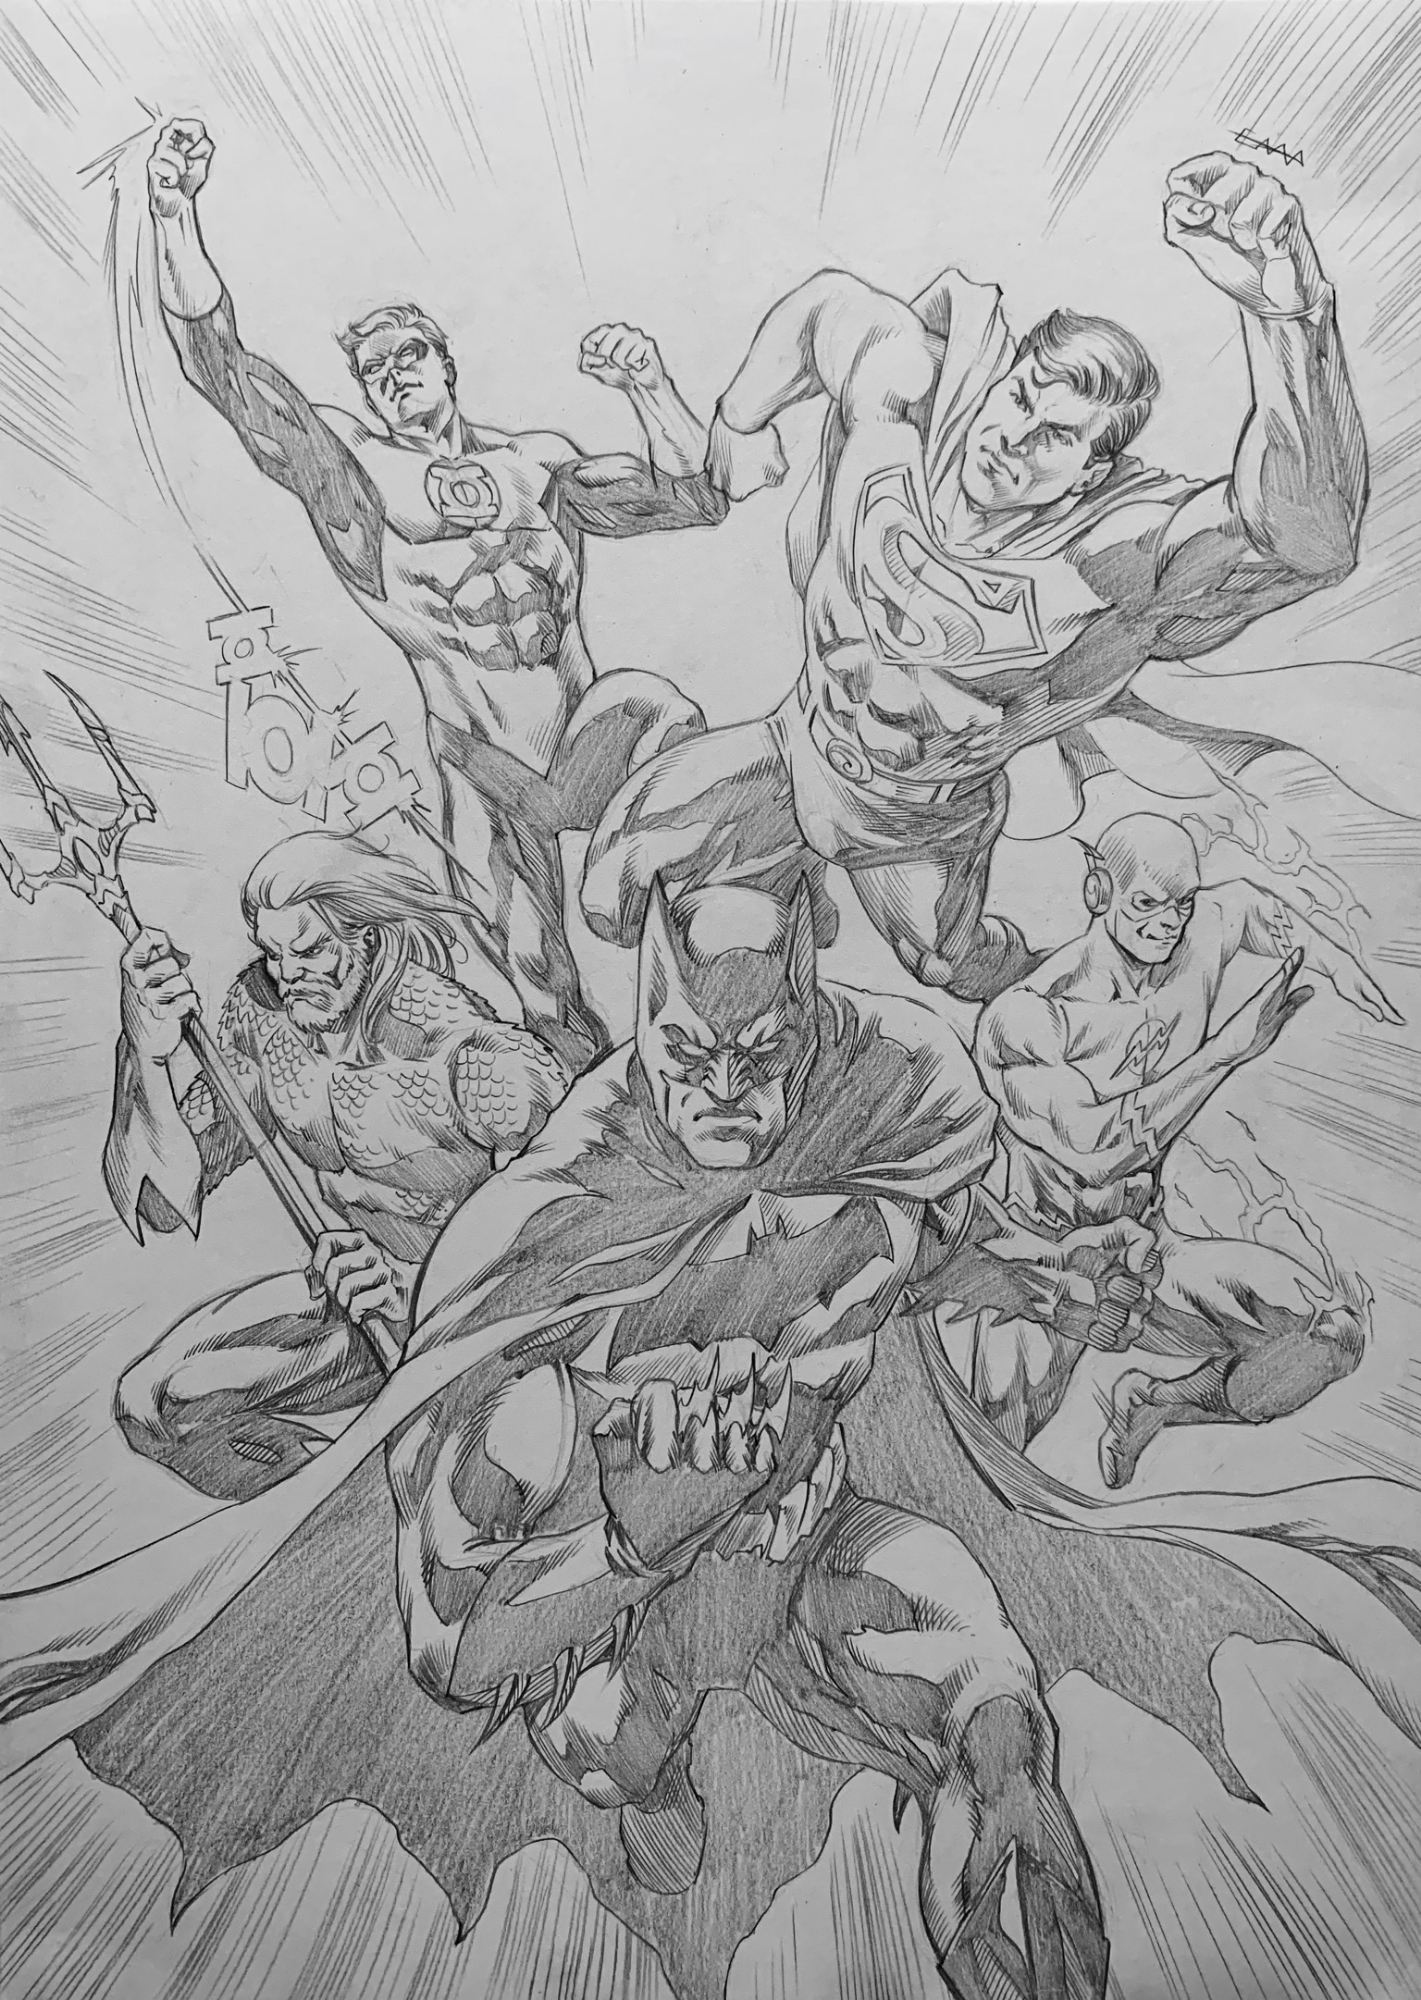 Justice League New 52 (Inks) by wburton19 on DeviantArt